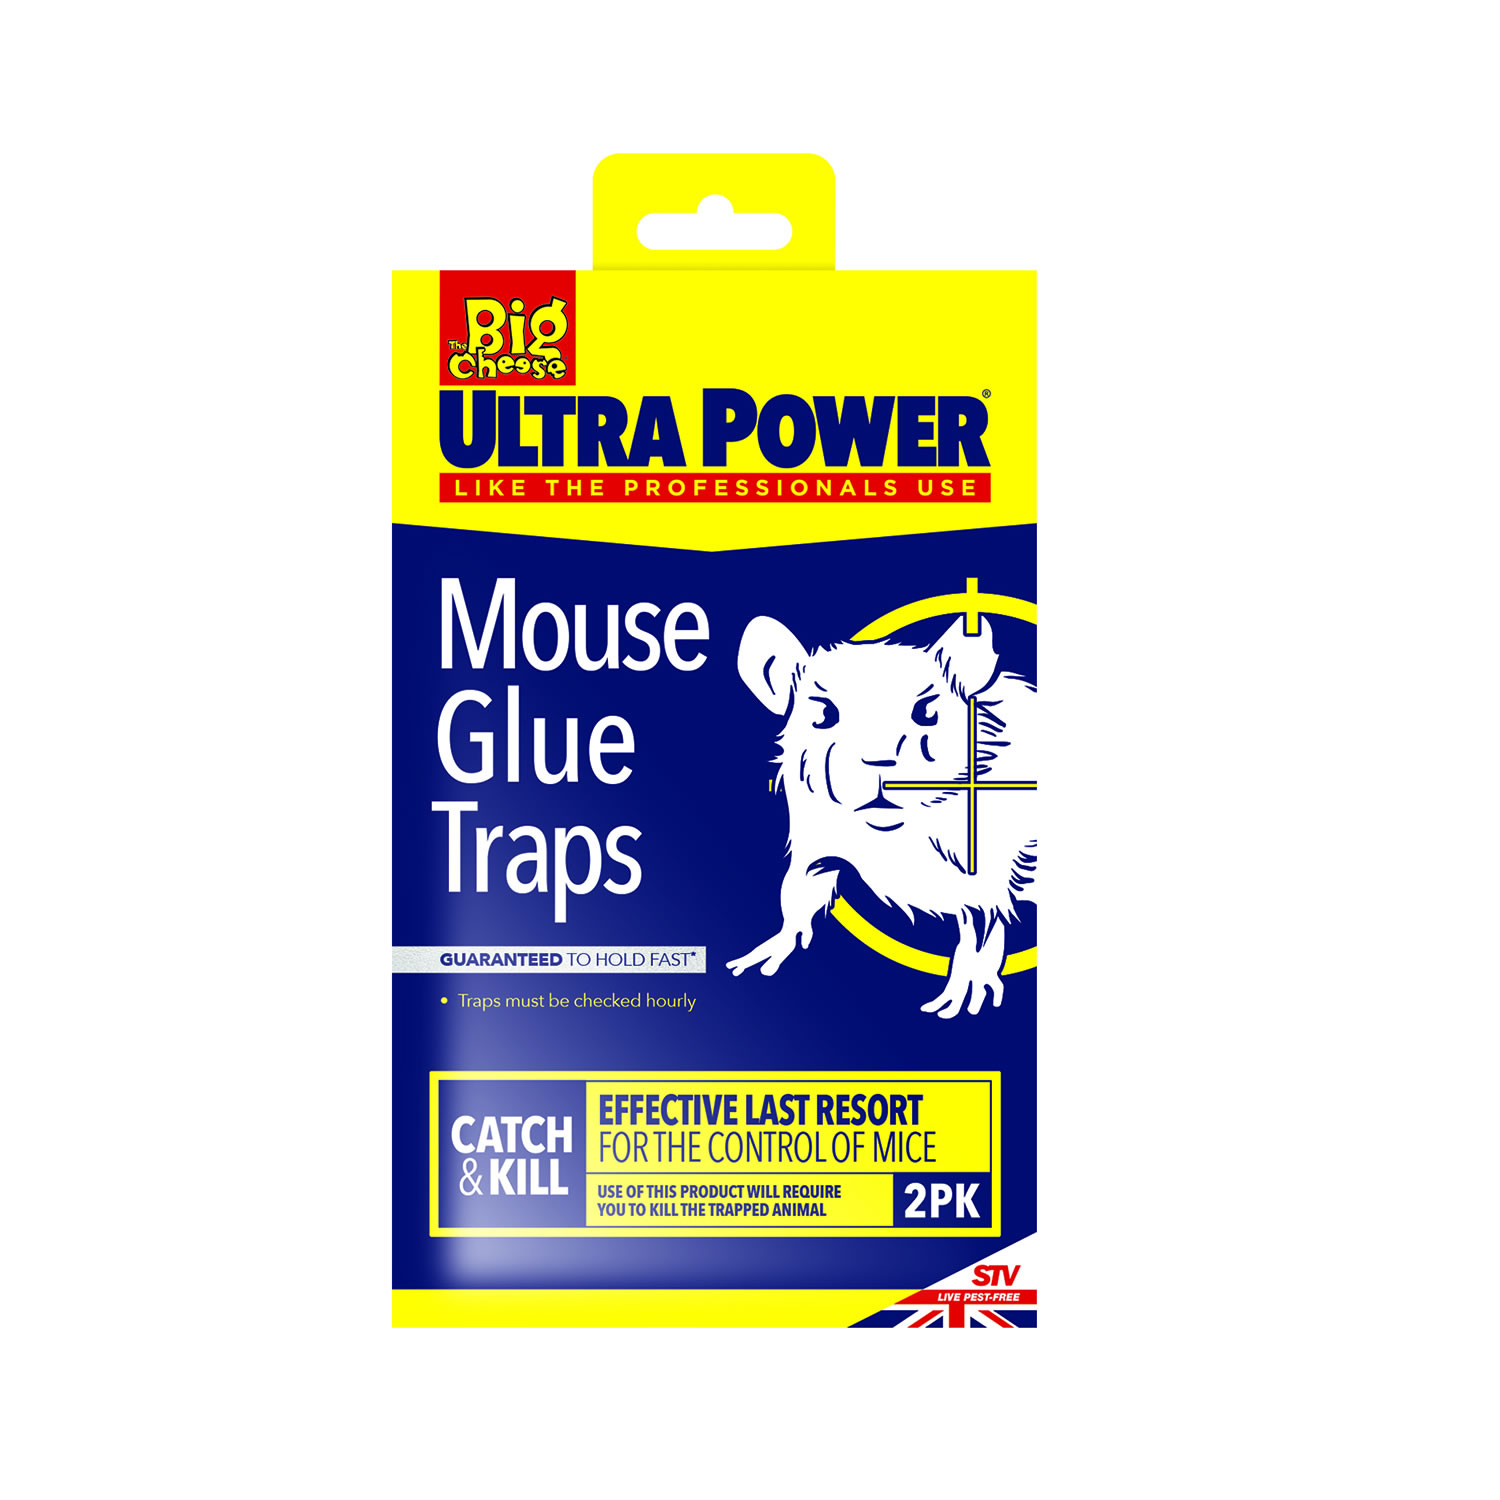 THE BIG CHEESE ULTRA POWER MOUSE GLUE TRAP TWIN PACK